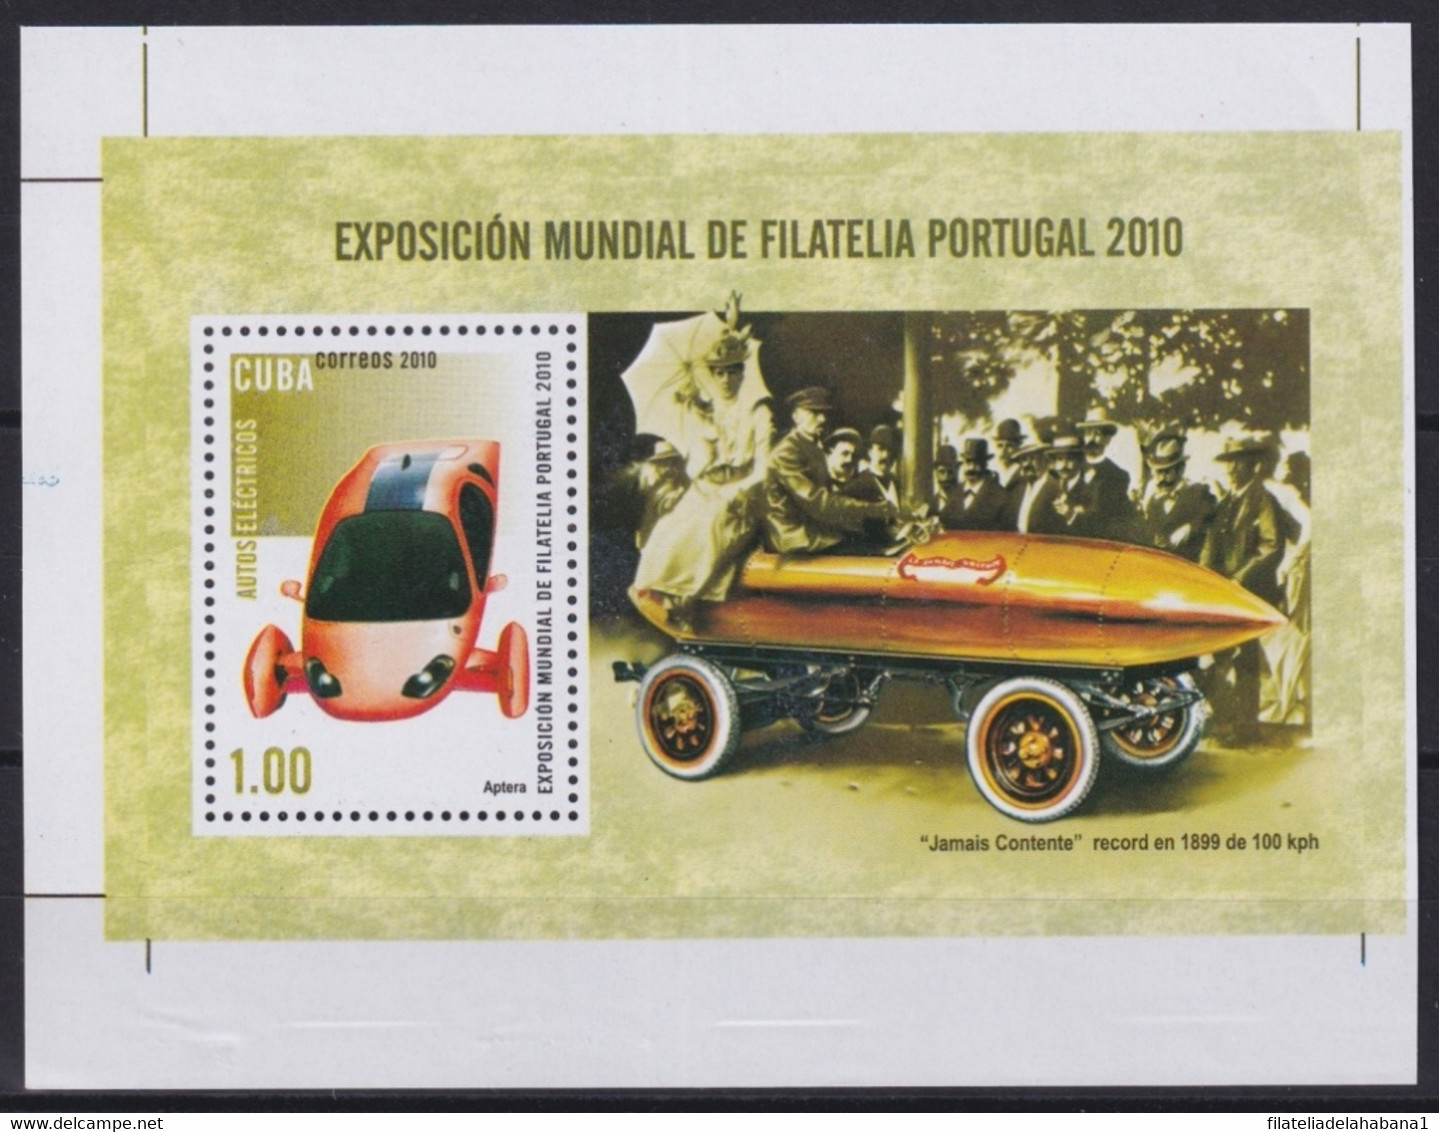 2010.666 CUBA MNH 2010 IMPERFORATED PROOF PORTUGAL PHILATELIC EXPO CAR APTERA. - Imperforates, Proofs & Errors